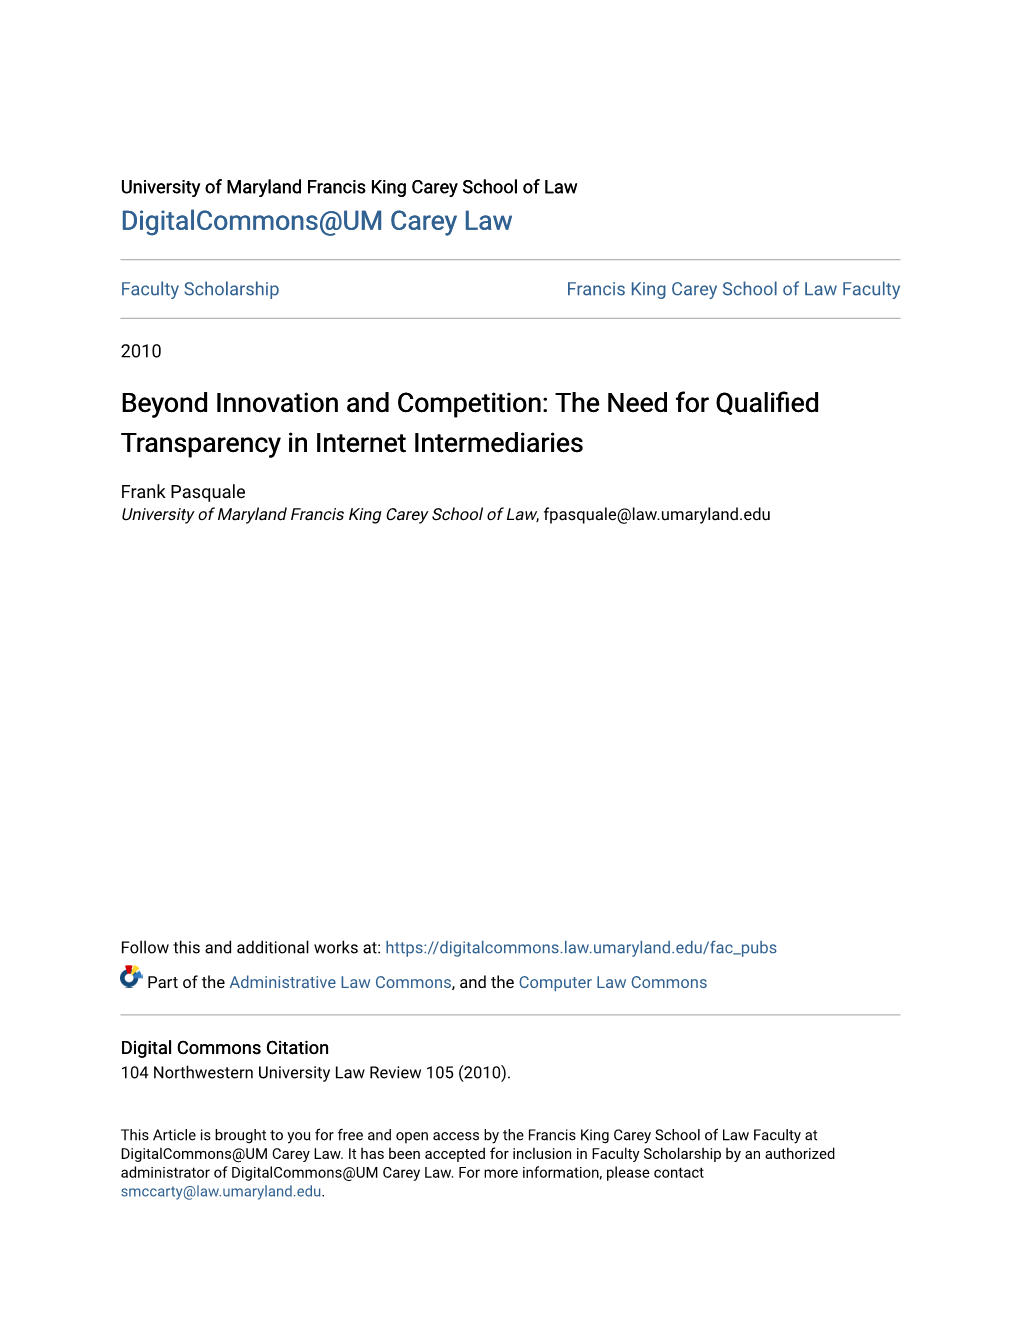 Beyond Innovation and Competition: the Need for Qualified Transparency in Internet Intermediaries